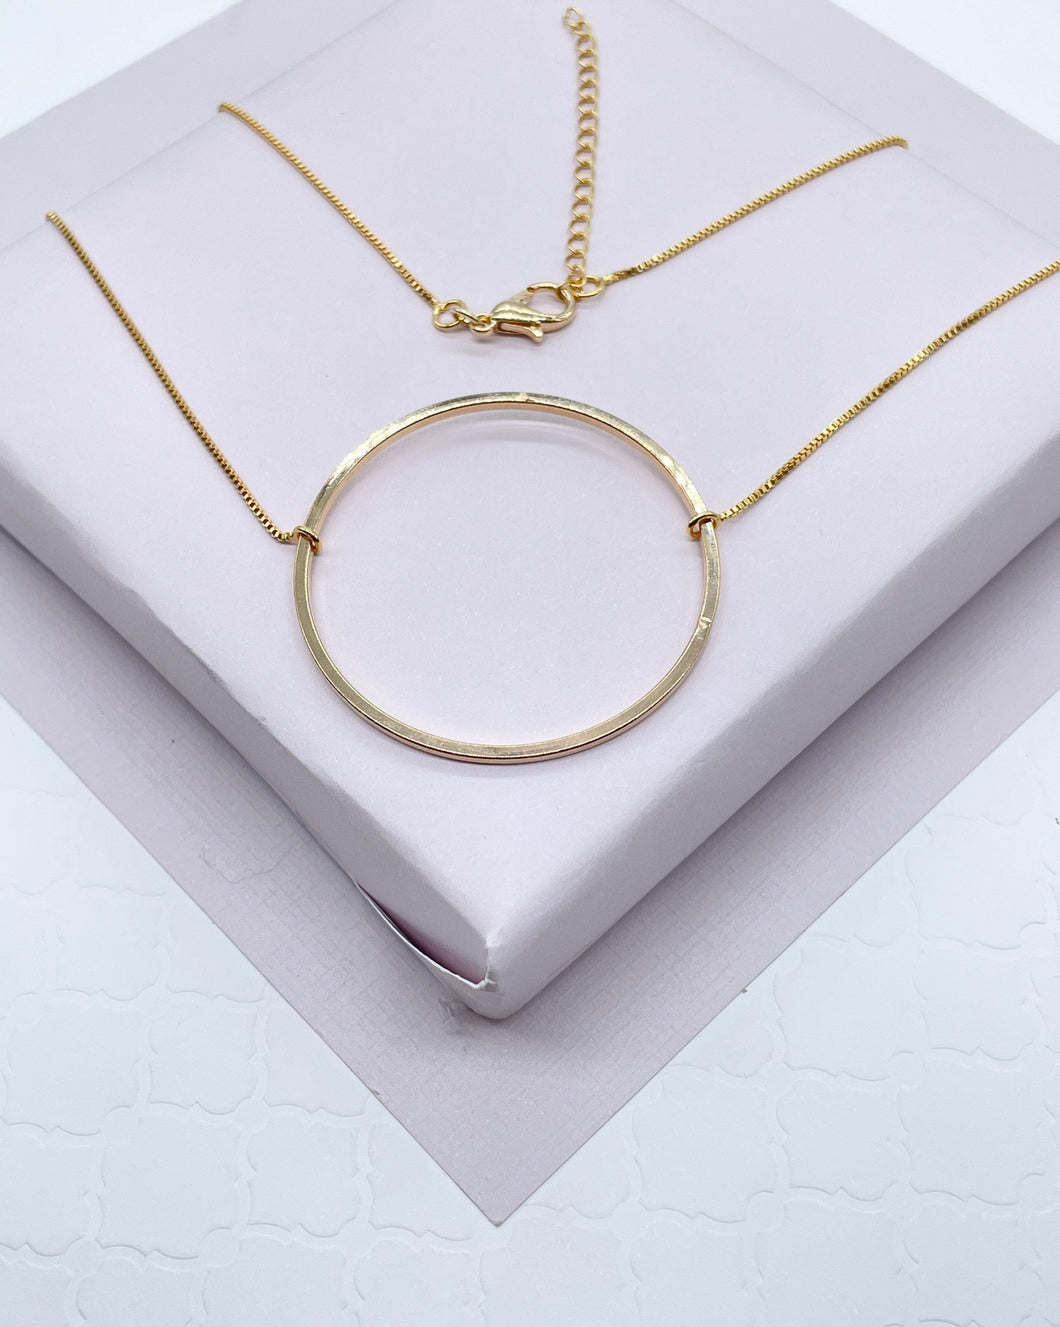 18k Gold Filled Box Chain Featuring The Circle of Life Charm Pendant Necklace,